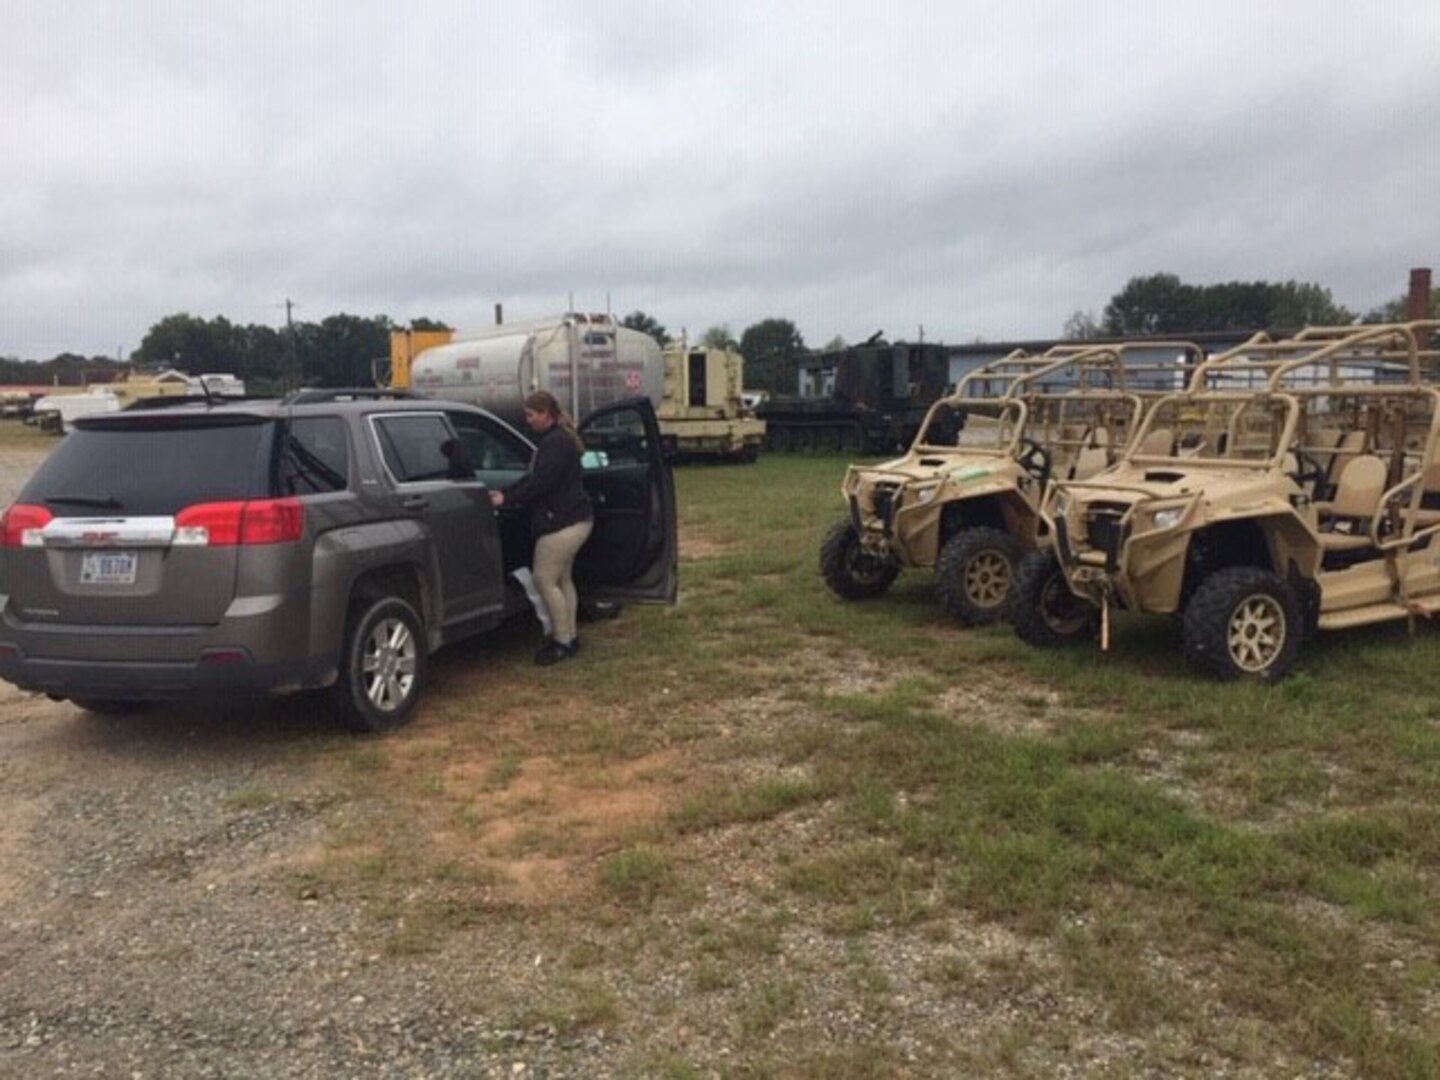 Kelly Clabbers, a Fort Benning-based disposal service representative uses the Mobile Office equipment to print labels for the all-terrain vehicles she is receiving in place at the supported unit.